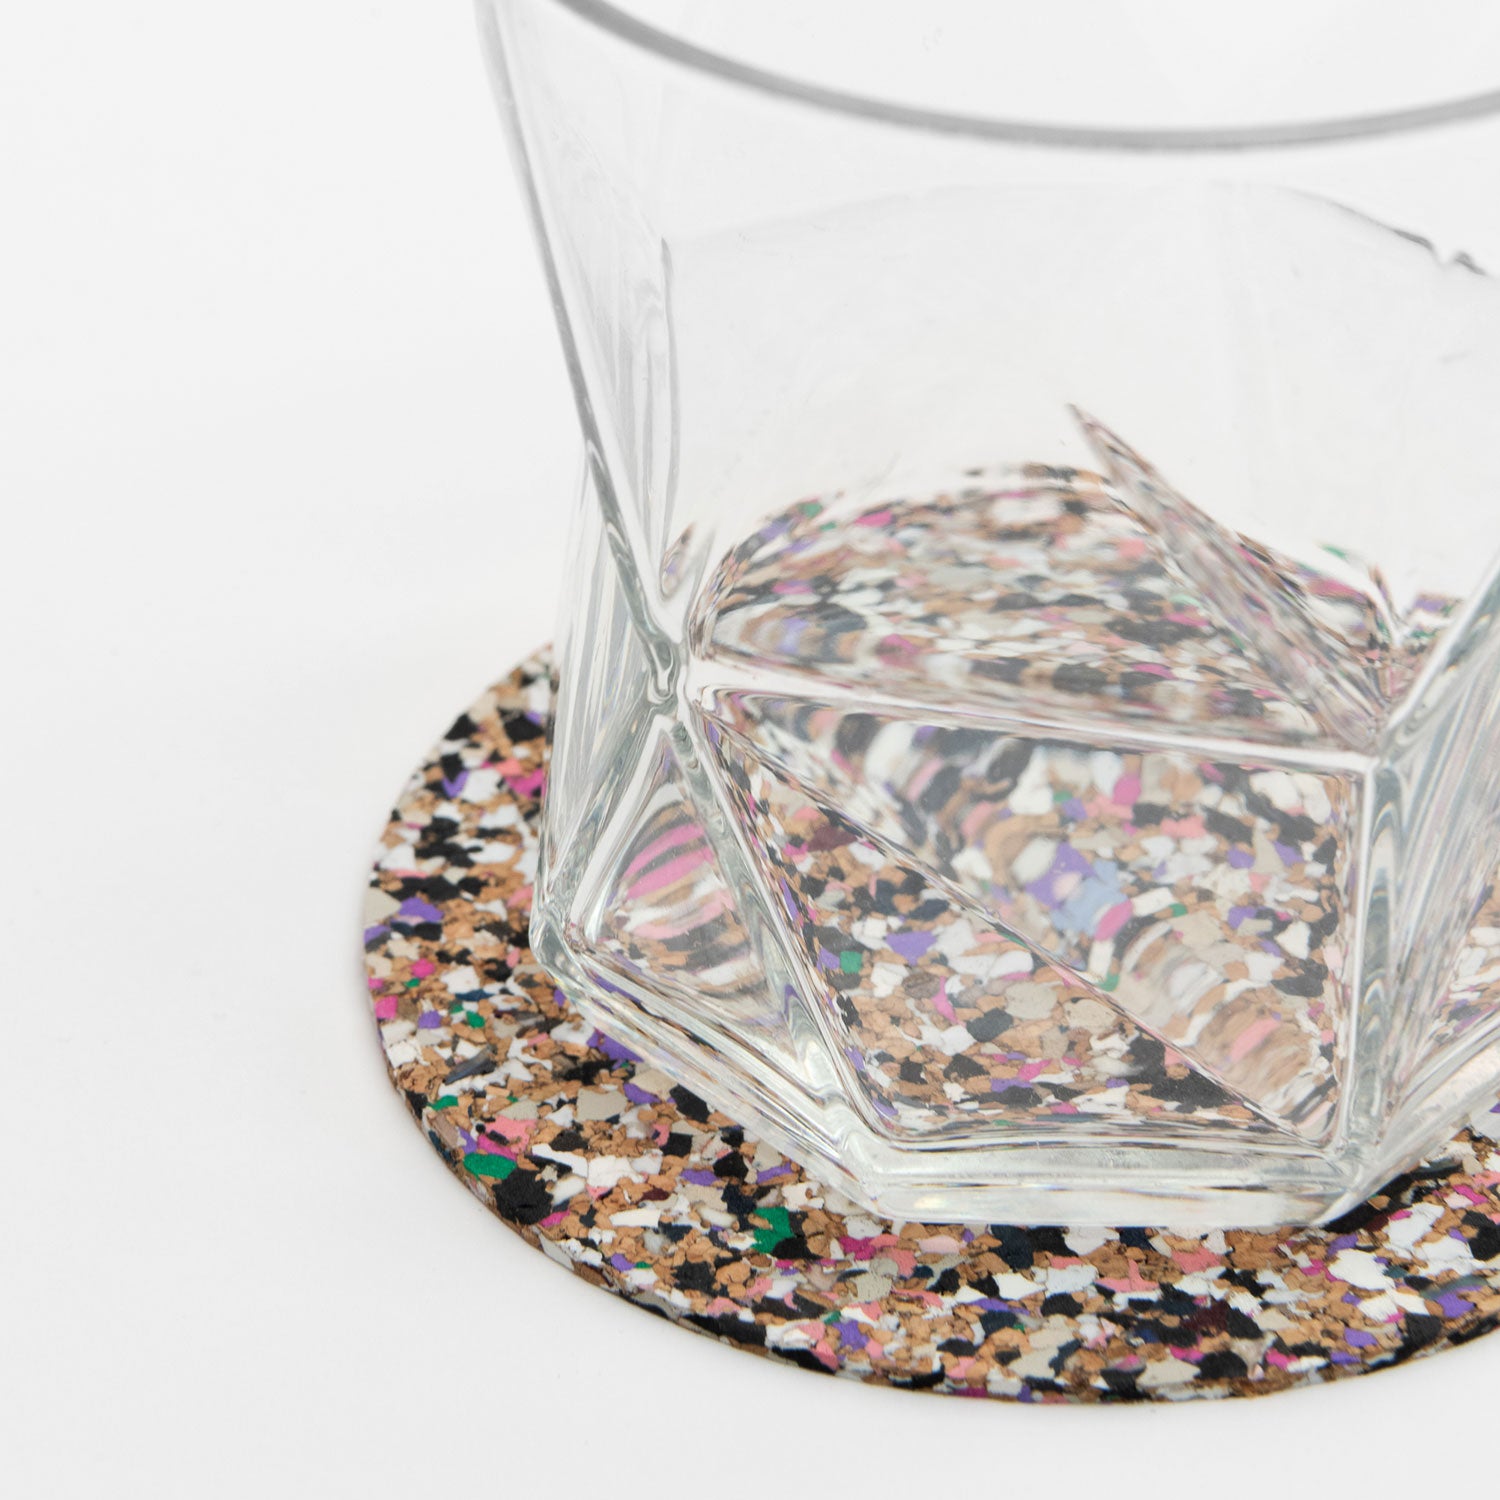 One of the multi-coloured Beach Clean Coasters with a clear glass on it.